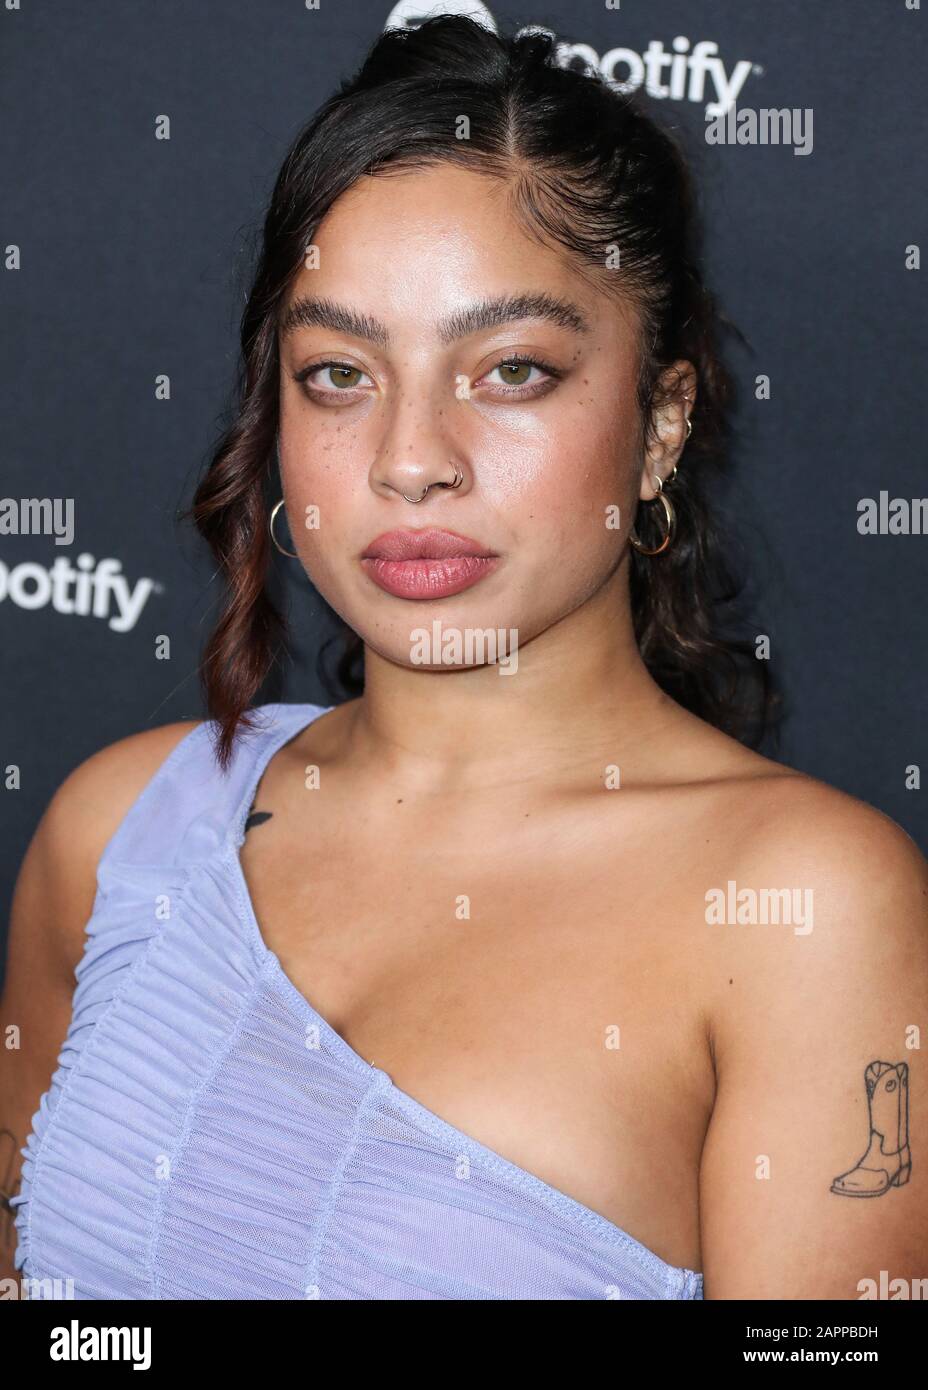 WEST HOLLYWOOD, LOS ANGELES, USA - JANUARY 23: Kiana Lede arrives at the Spotify Best New Artist 2020 Party held at The Lot Studios January 23, 2020 in West Hollywood,